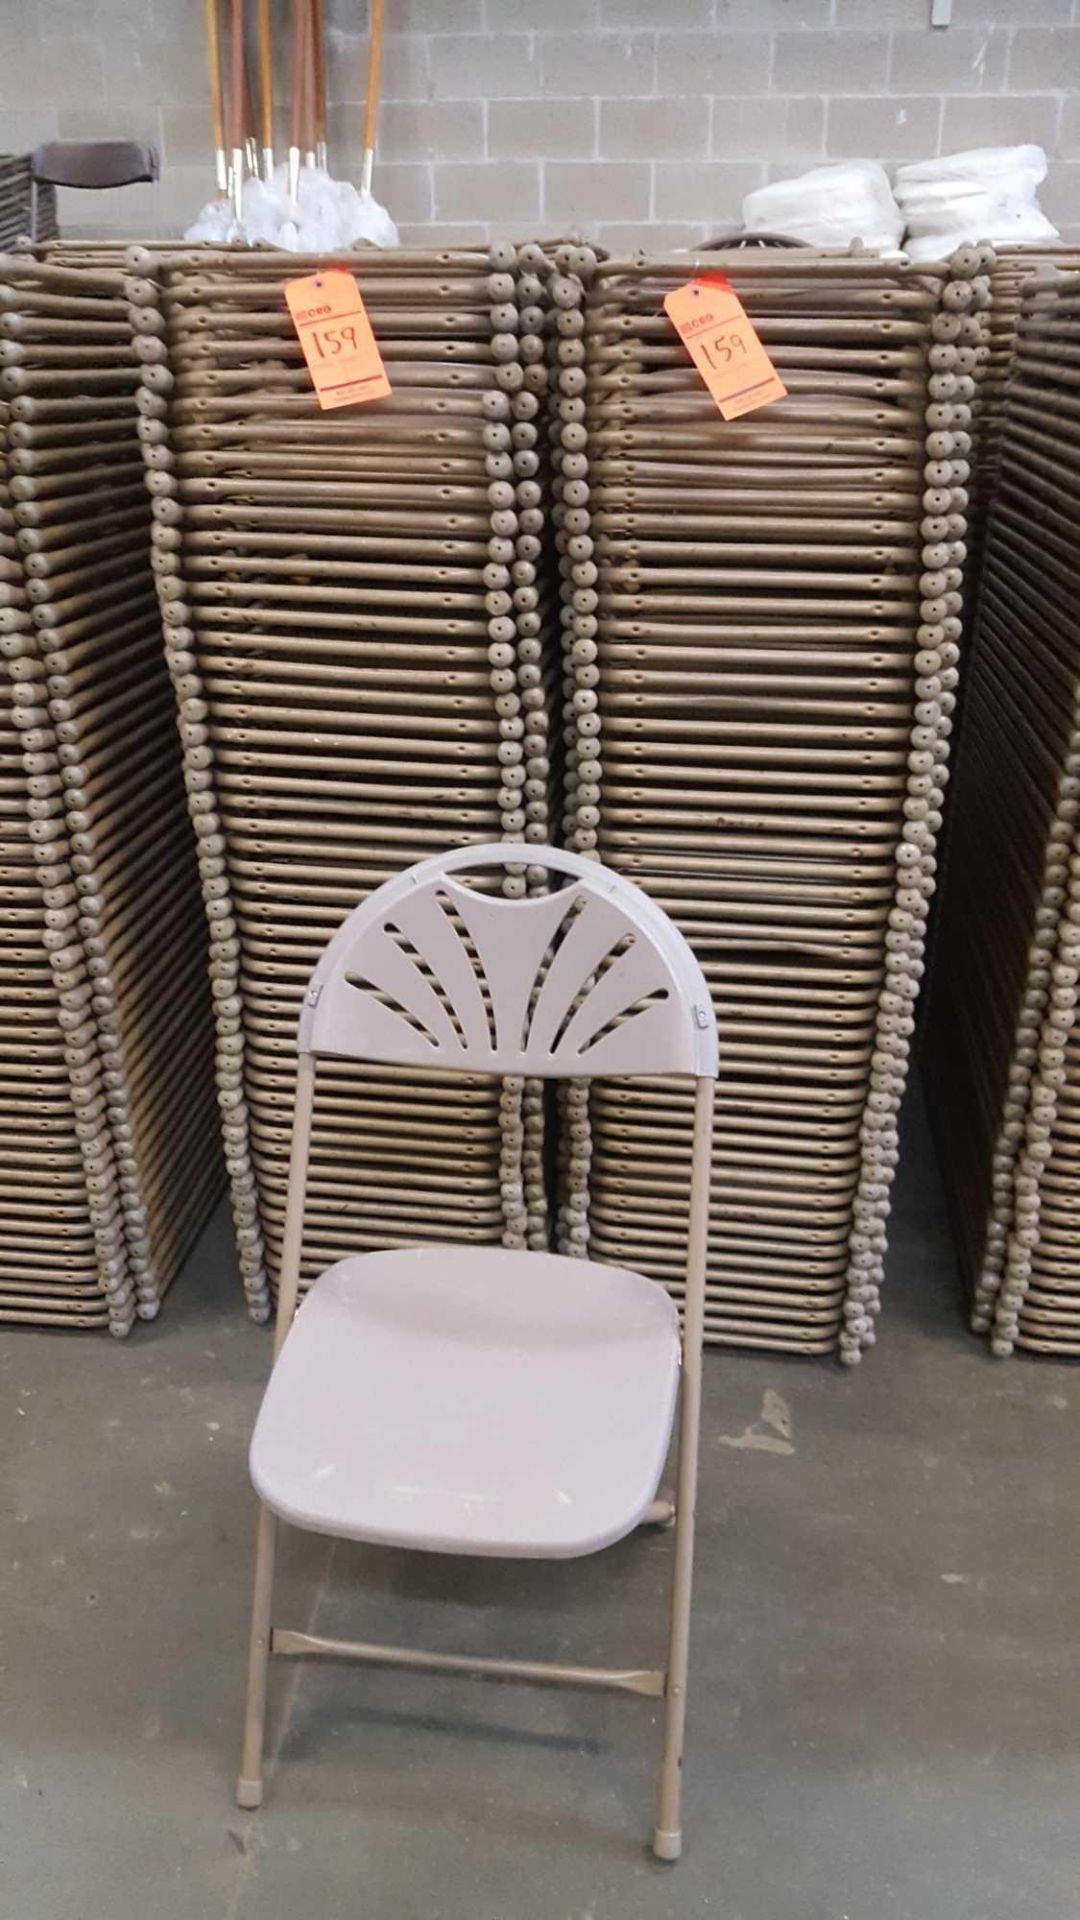 Lot of (100) Samsonite, neutral color, fan back, folding chairs - Image 2 of 2